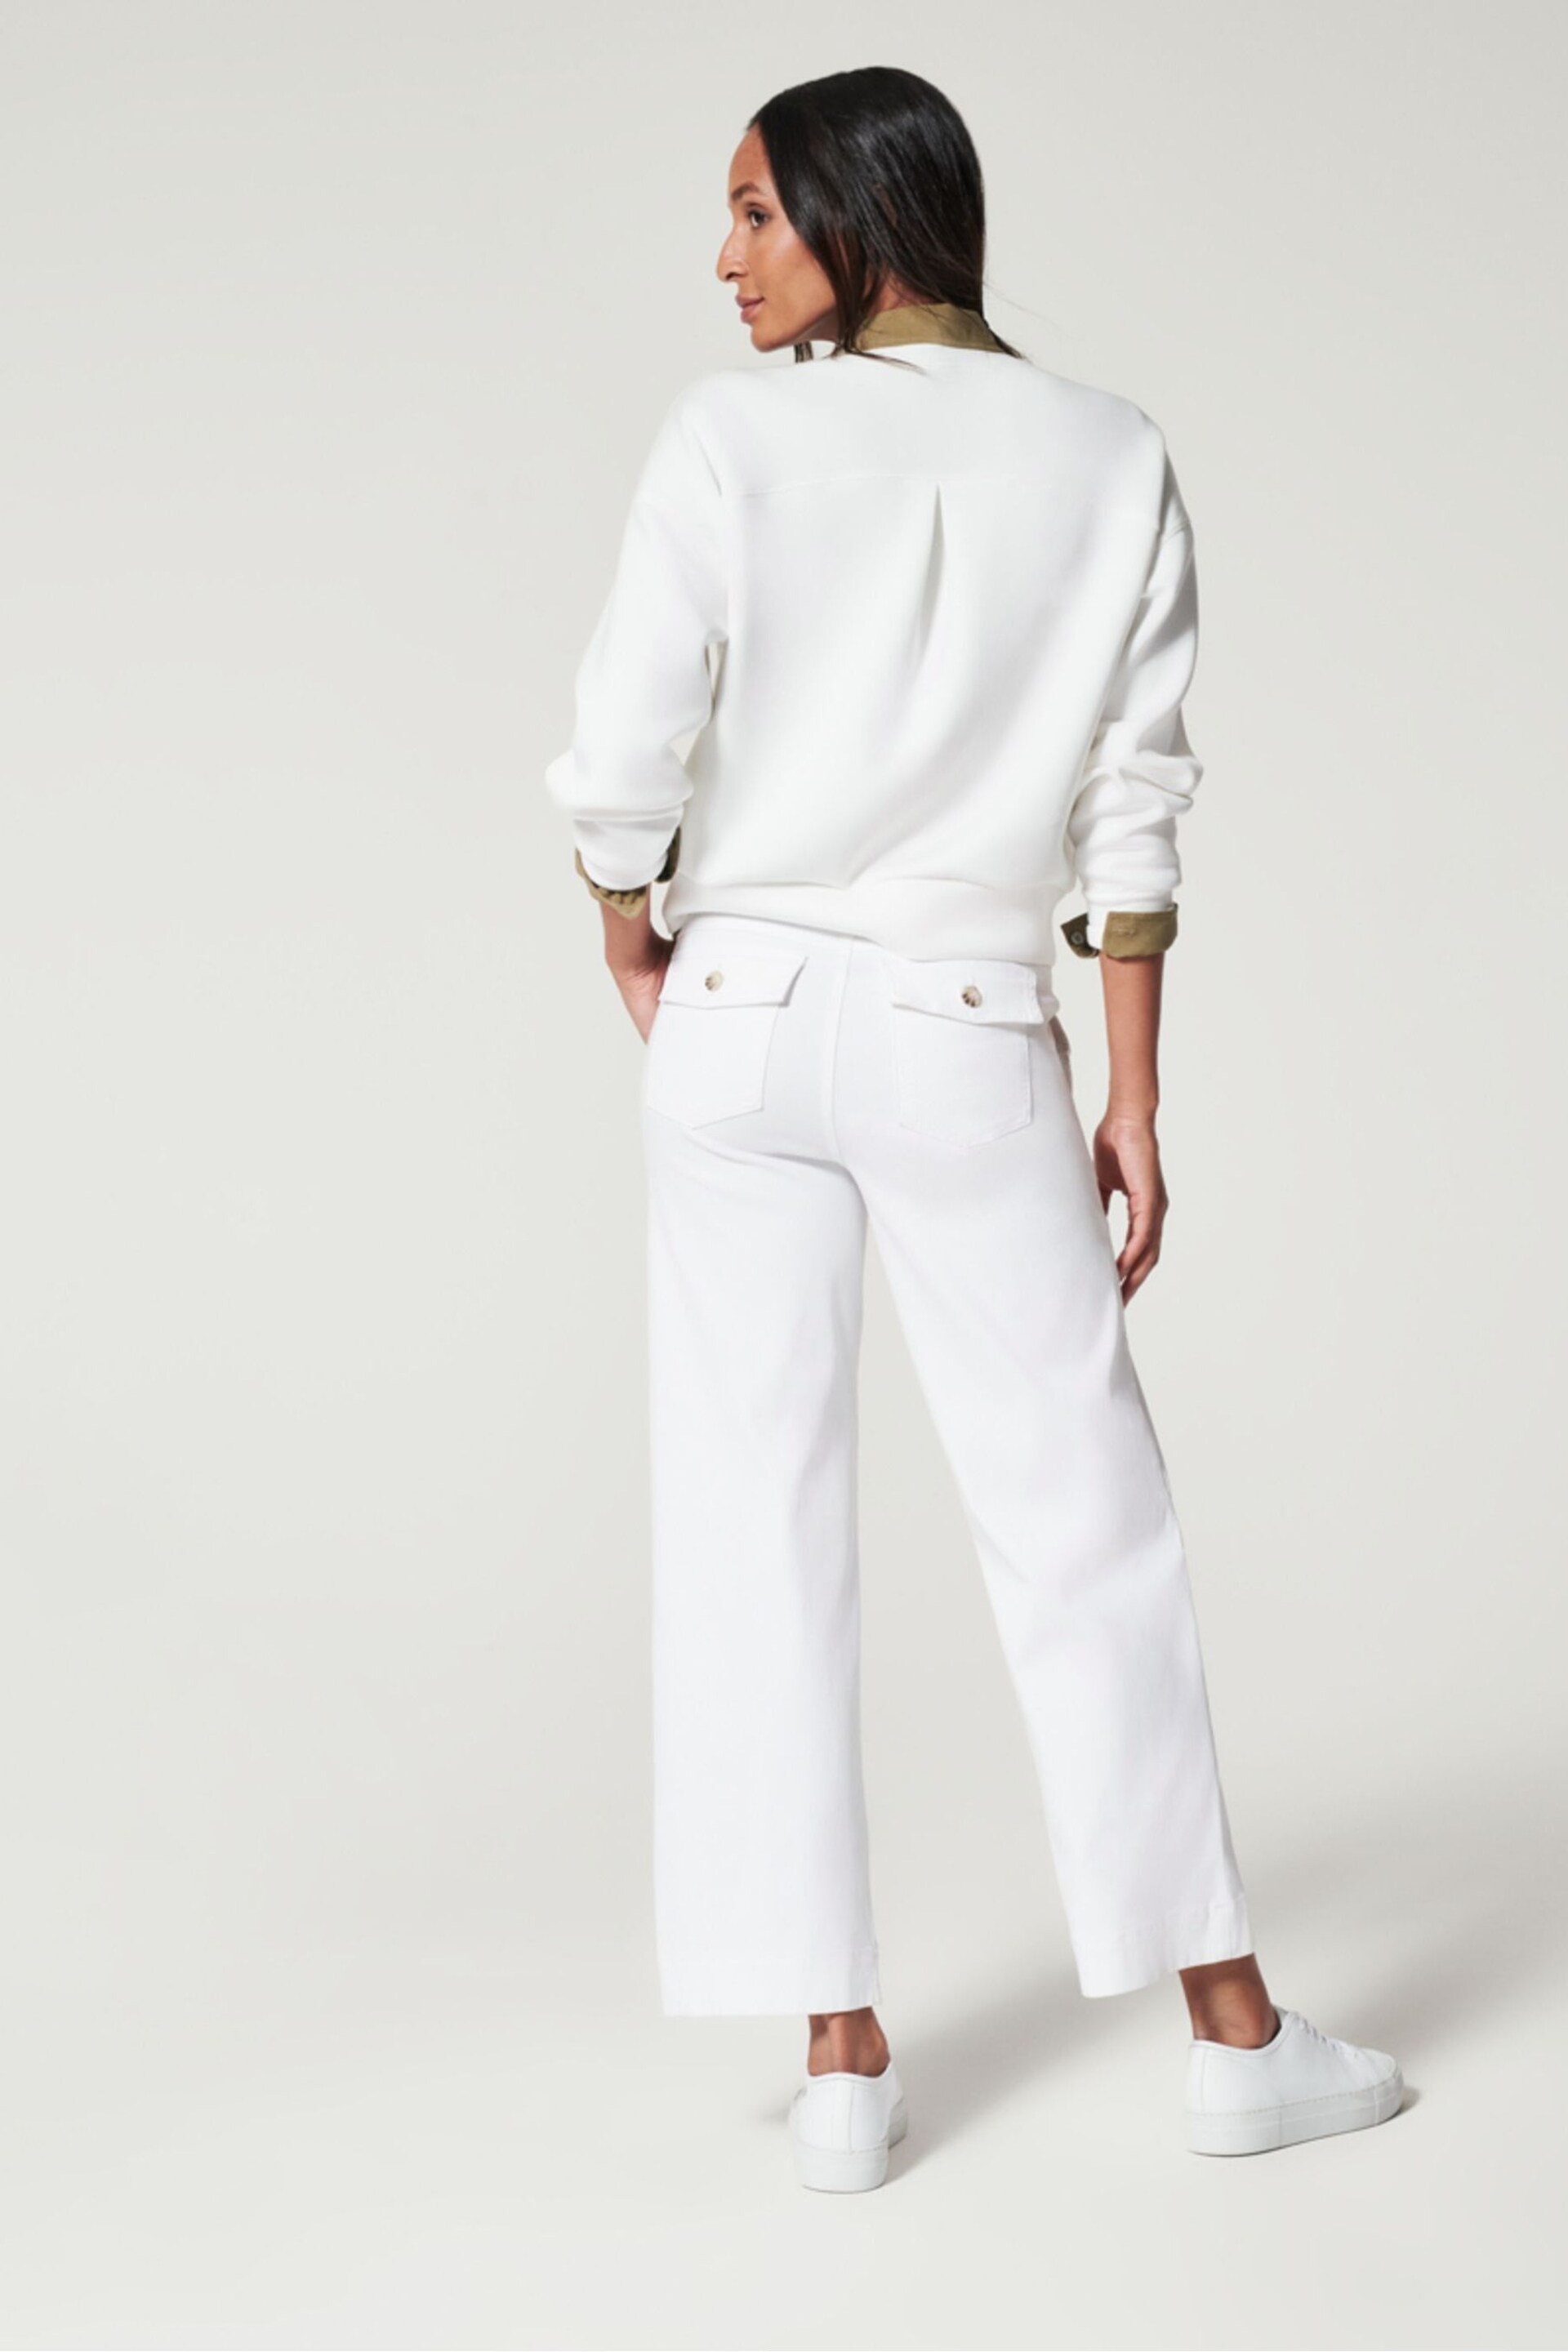 Spanx Stretch Twill Cropped Wide Leg White Trousers - Image 4 of 4